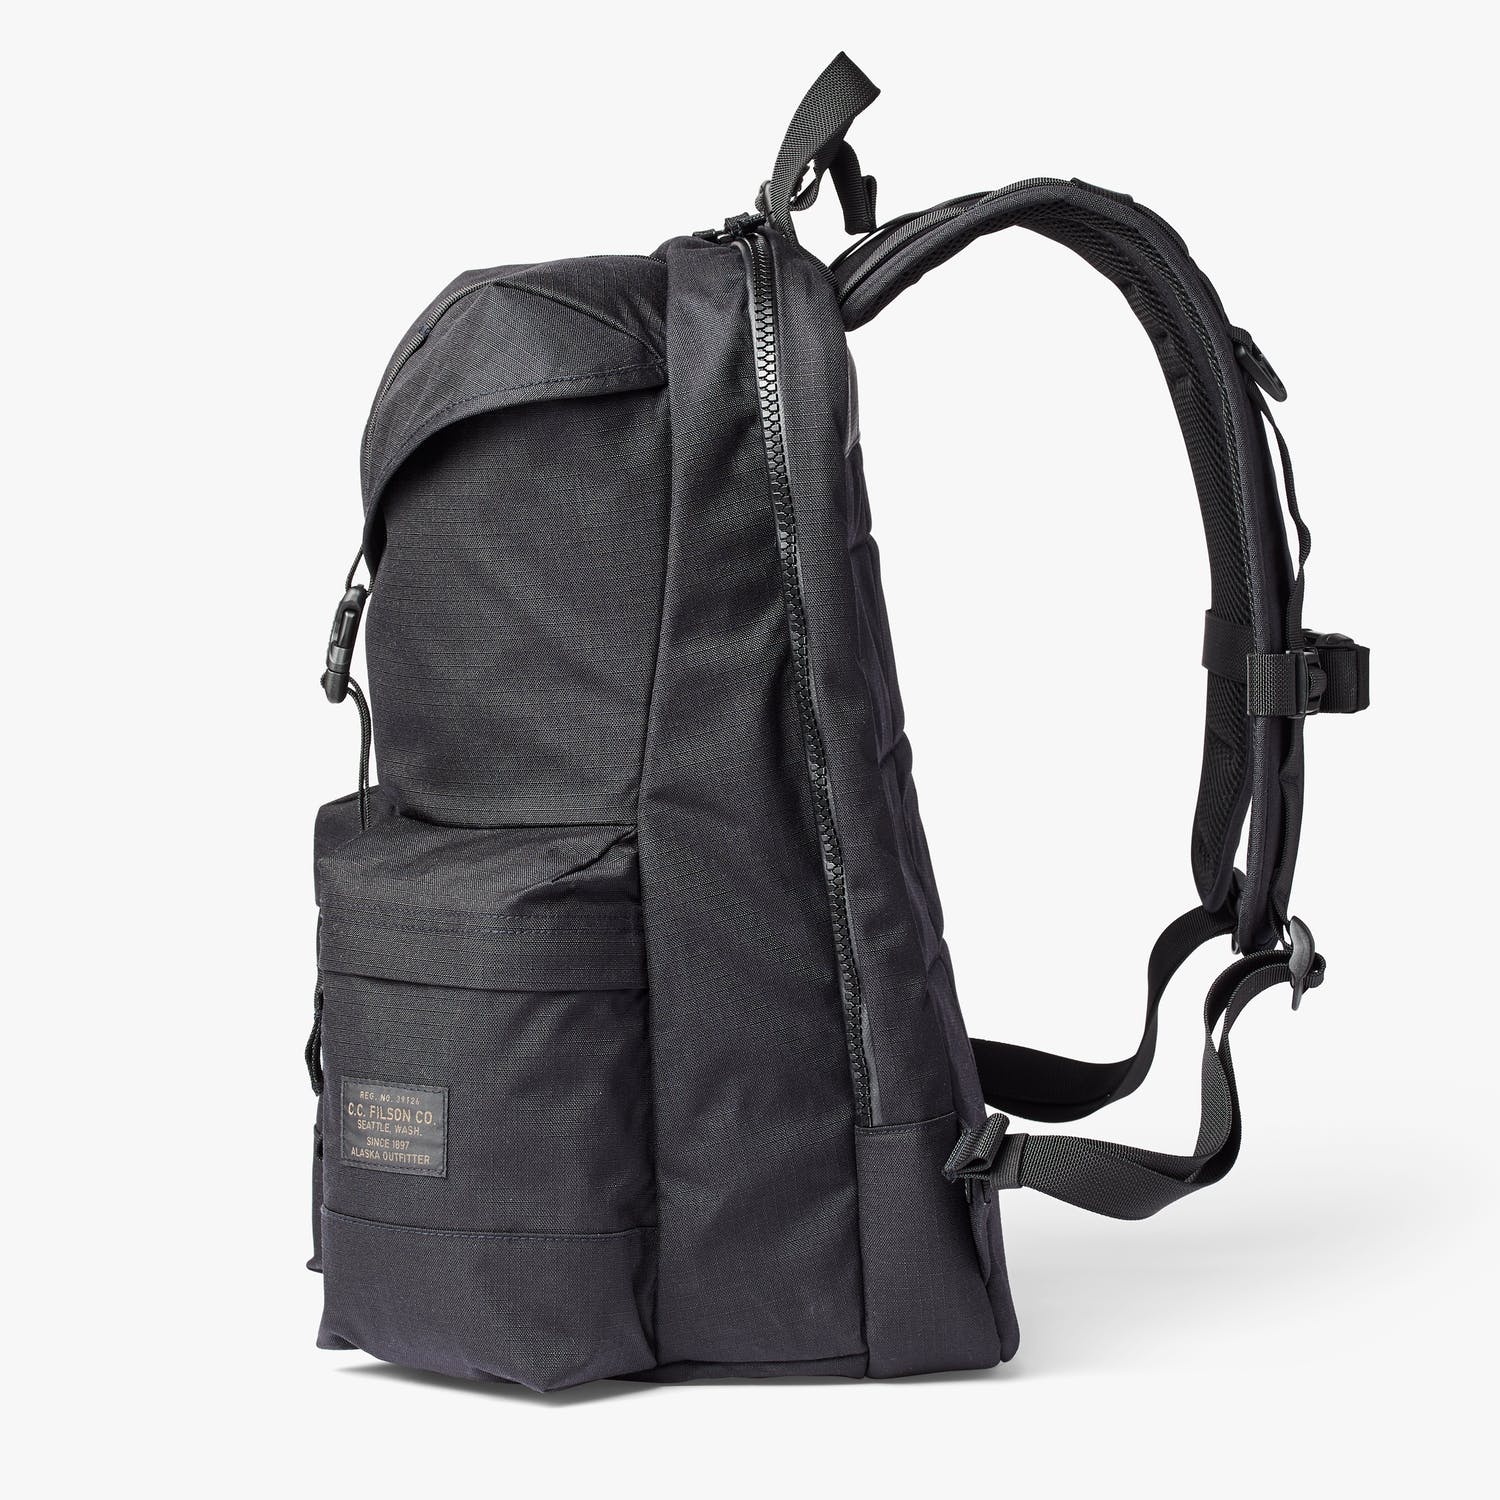 Black Backpack from Filson - Shop ripstop backpack here